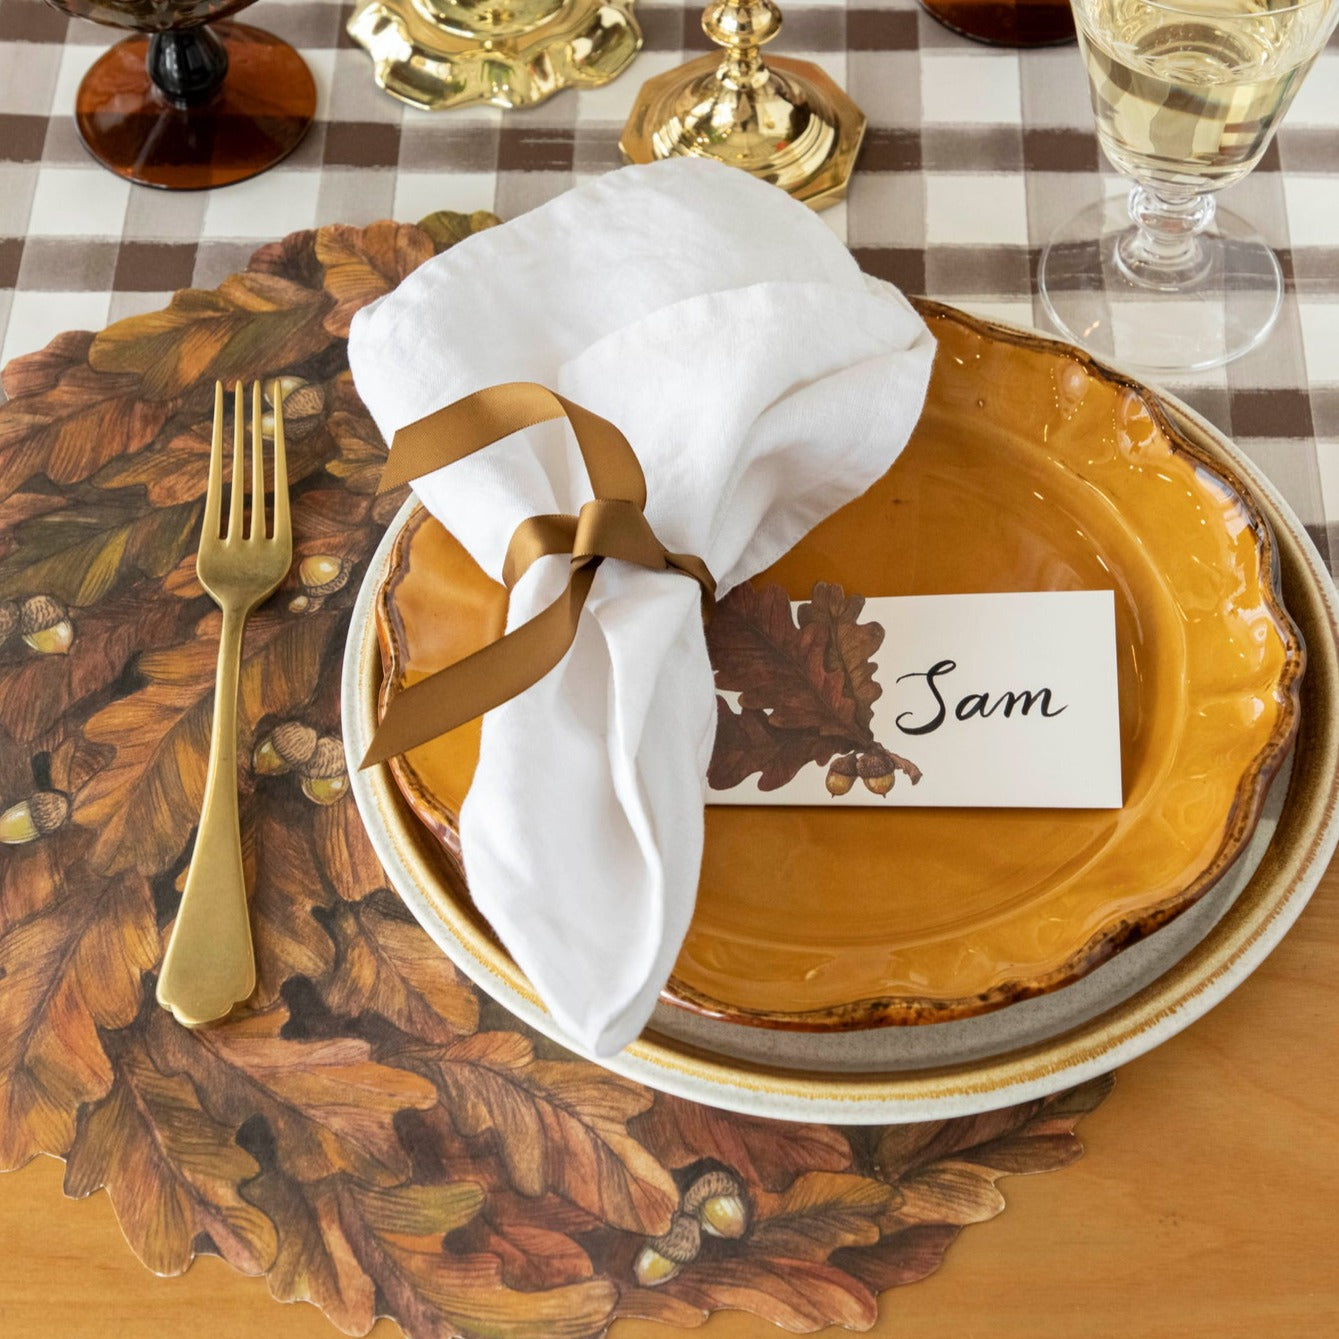 An elegant fall-themed place setting with a place card reading &quot;Sam&quot; laying flat on the plate.